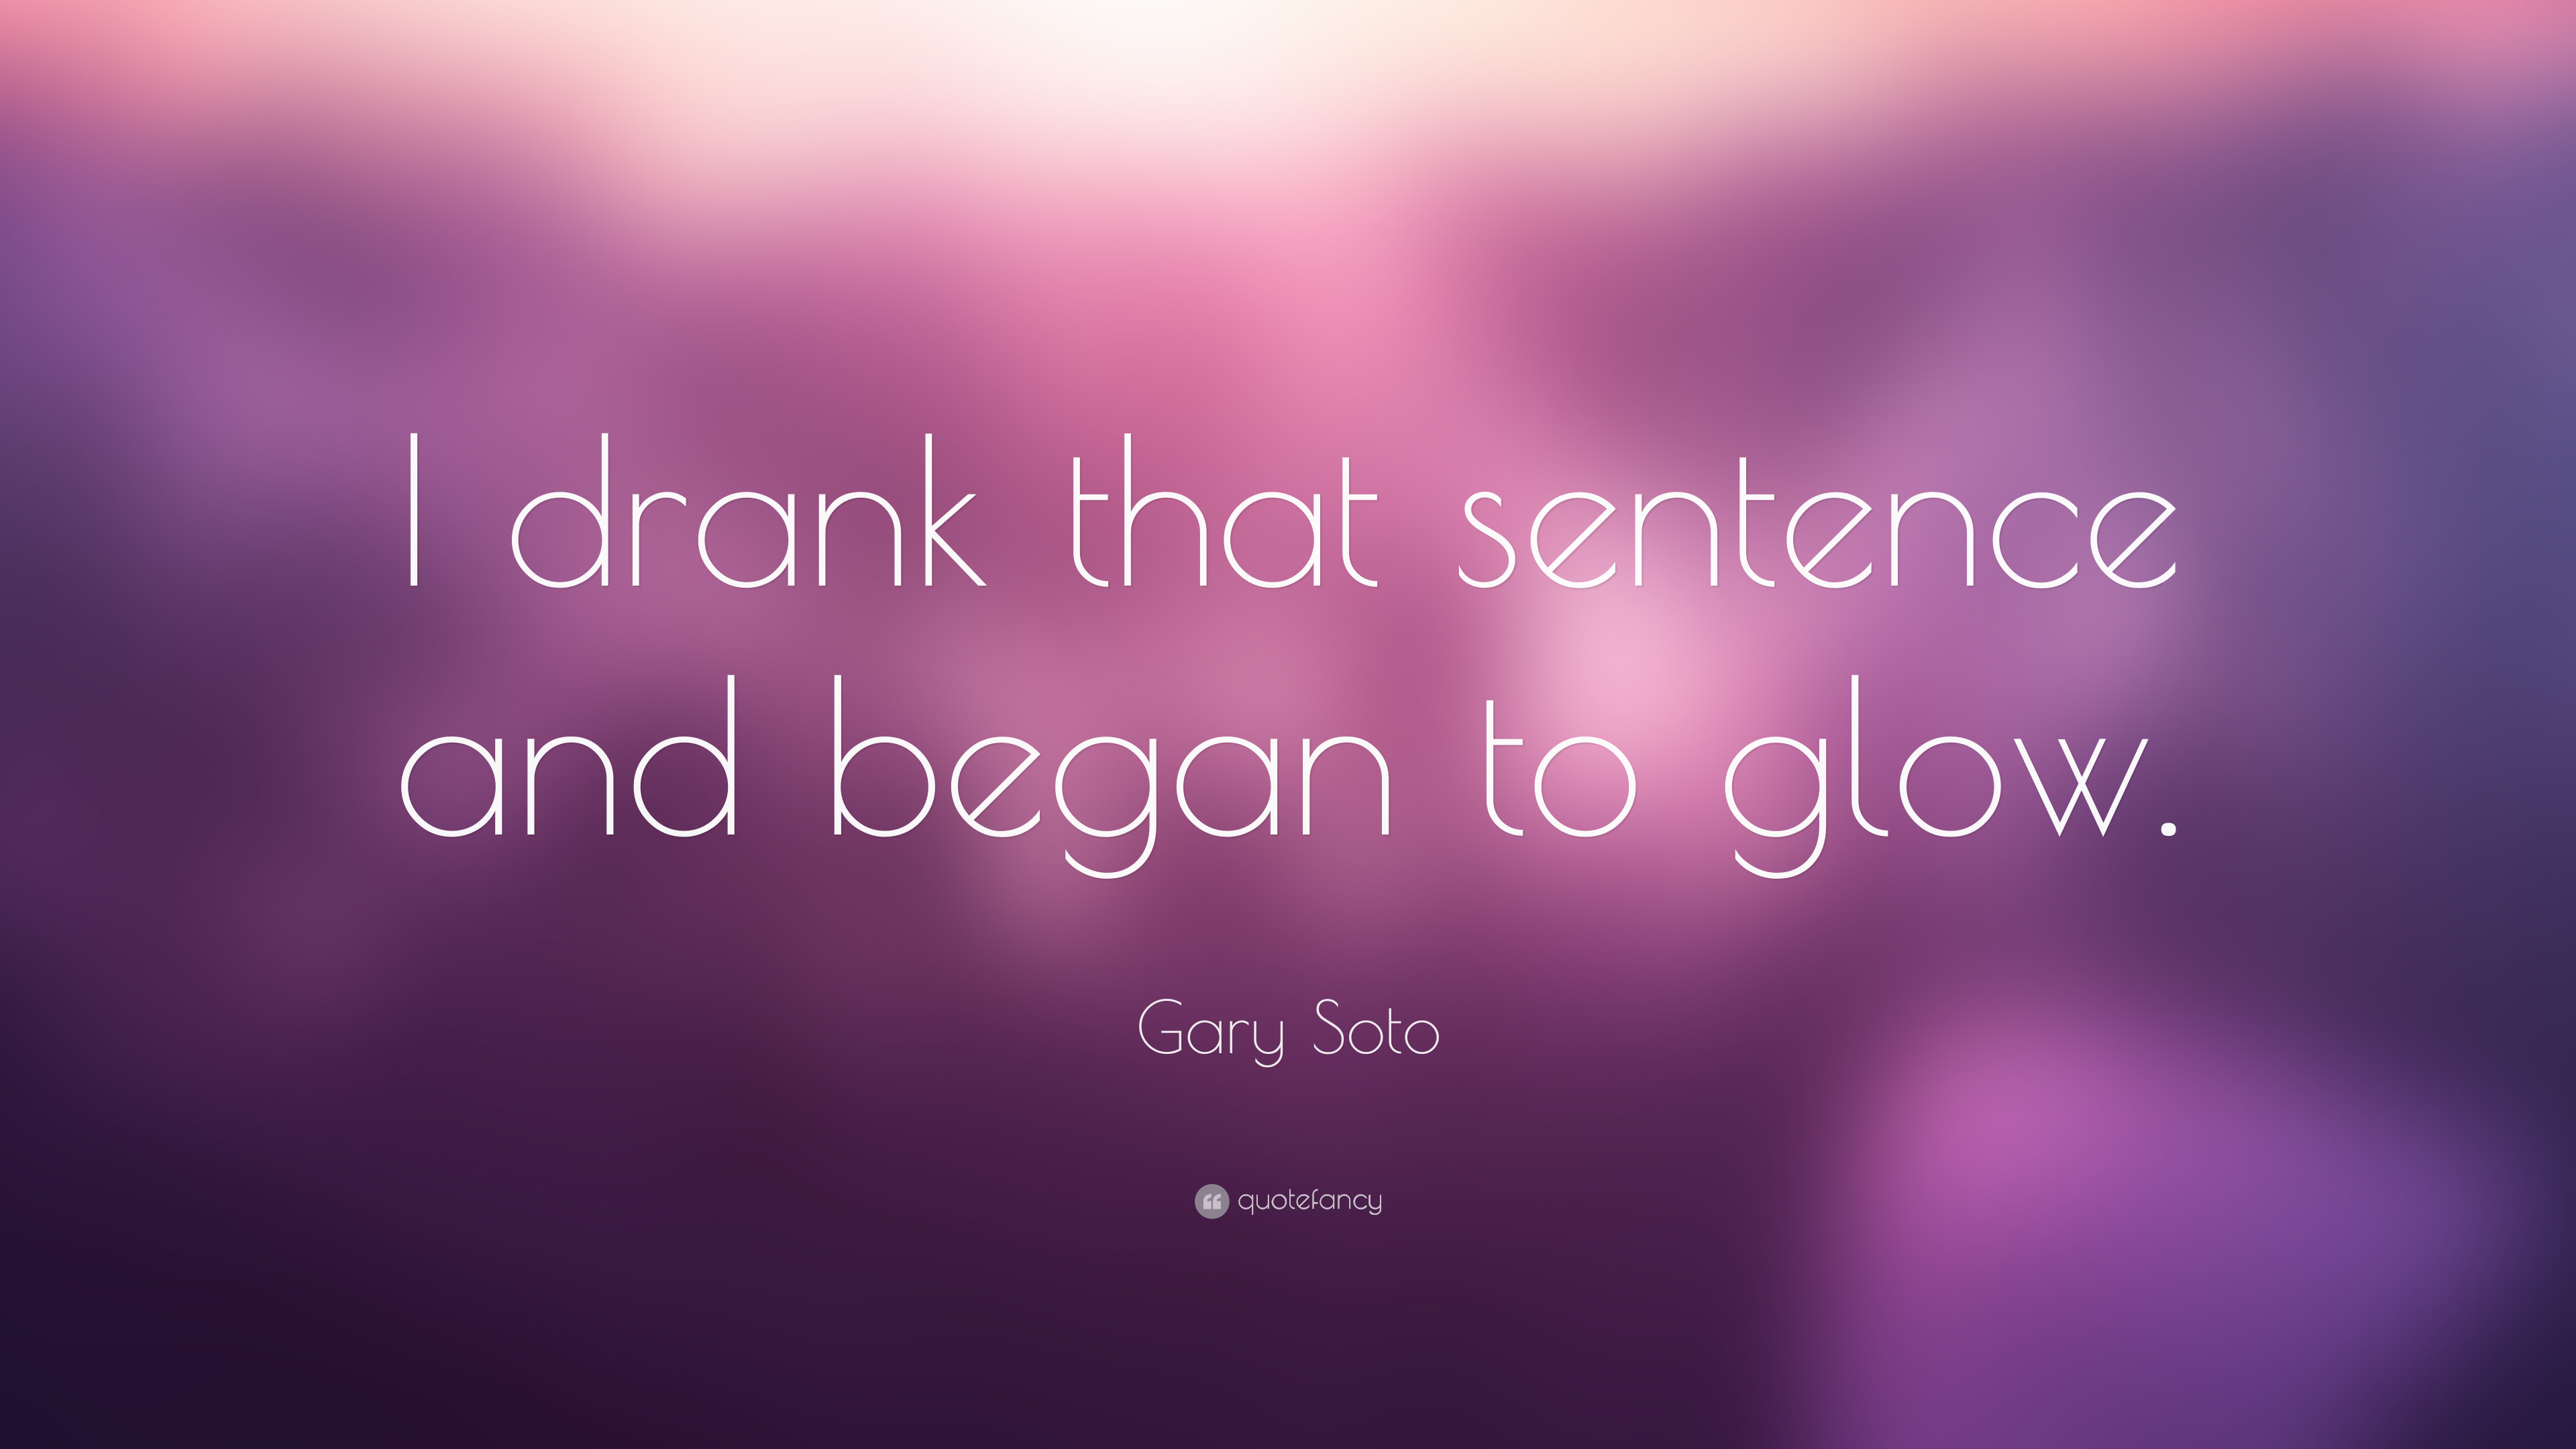 3840x2160 Gary Soto Quote: “I drank that sentence and began to glow.”